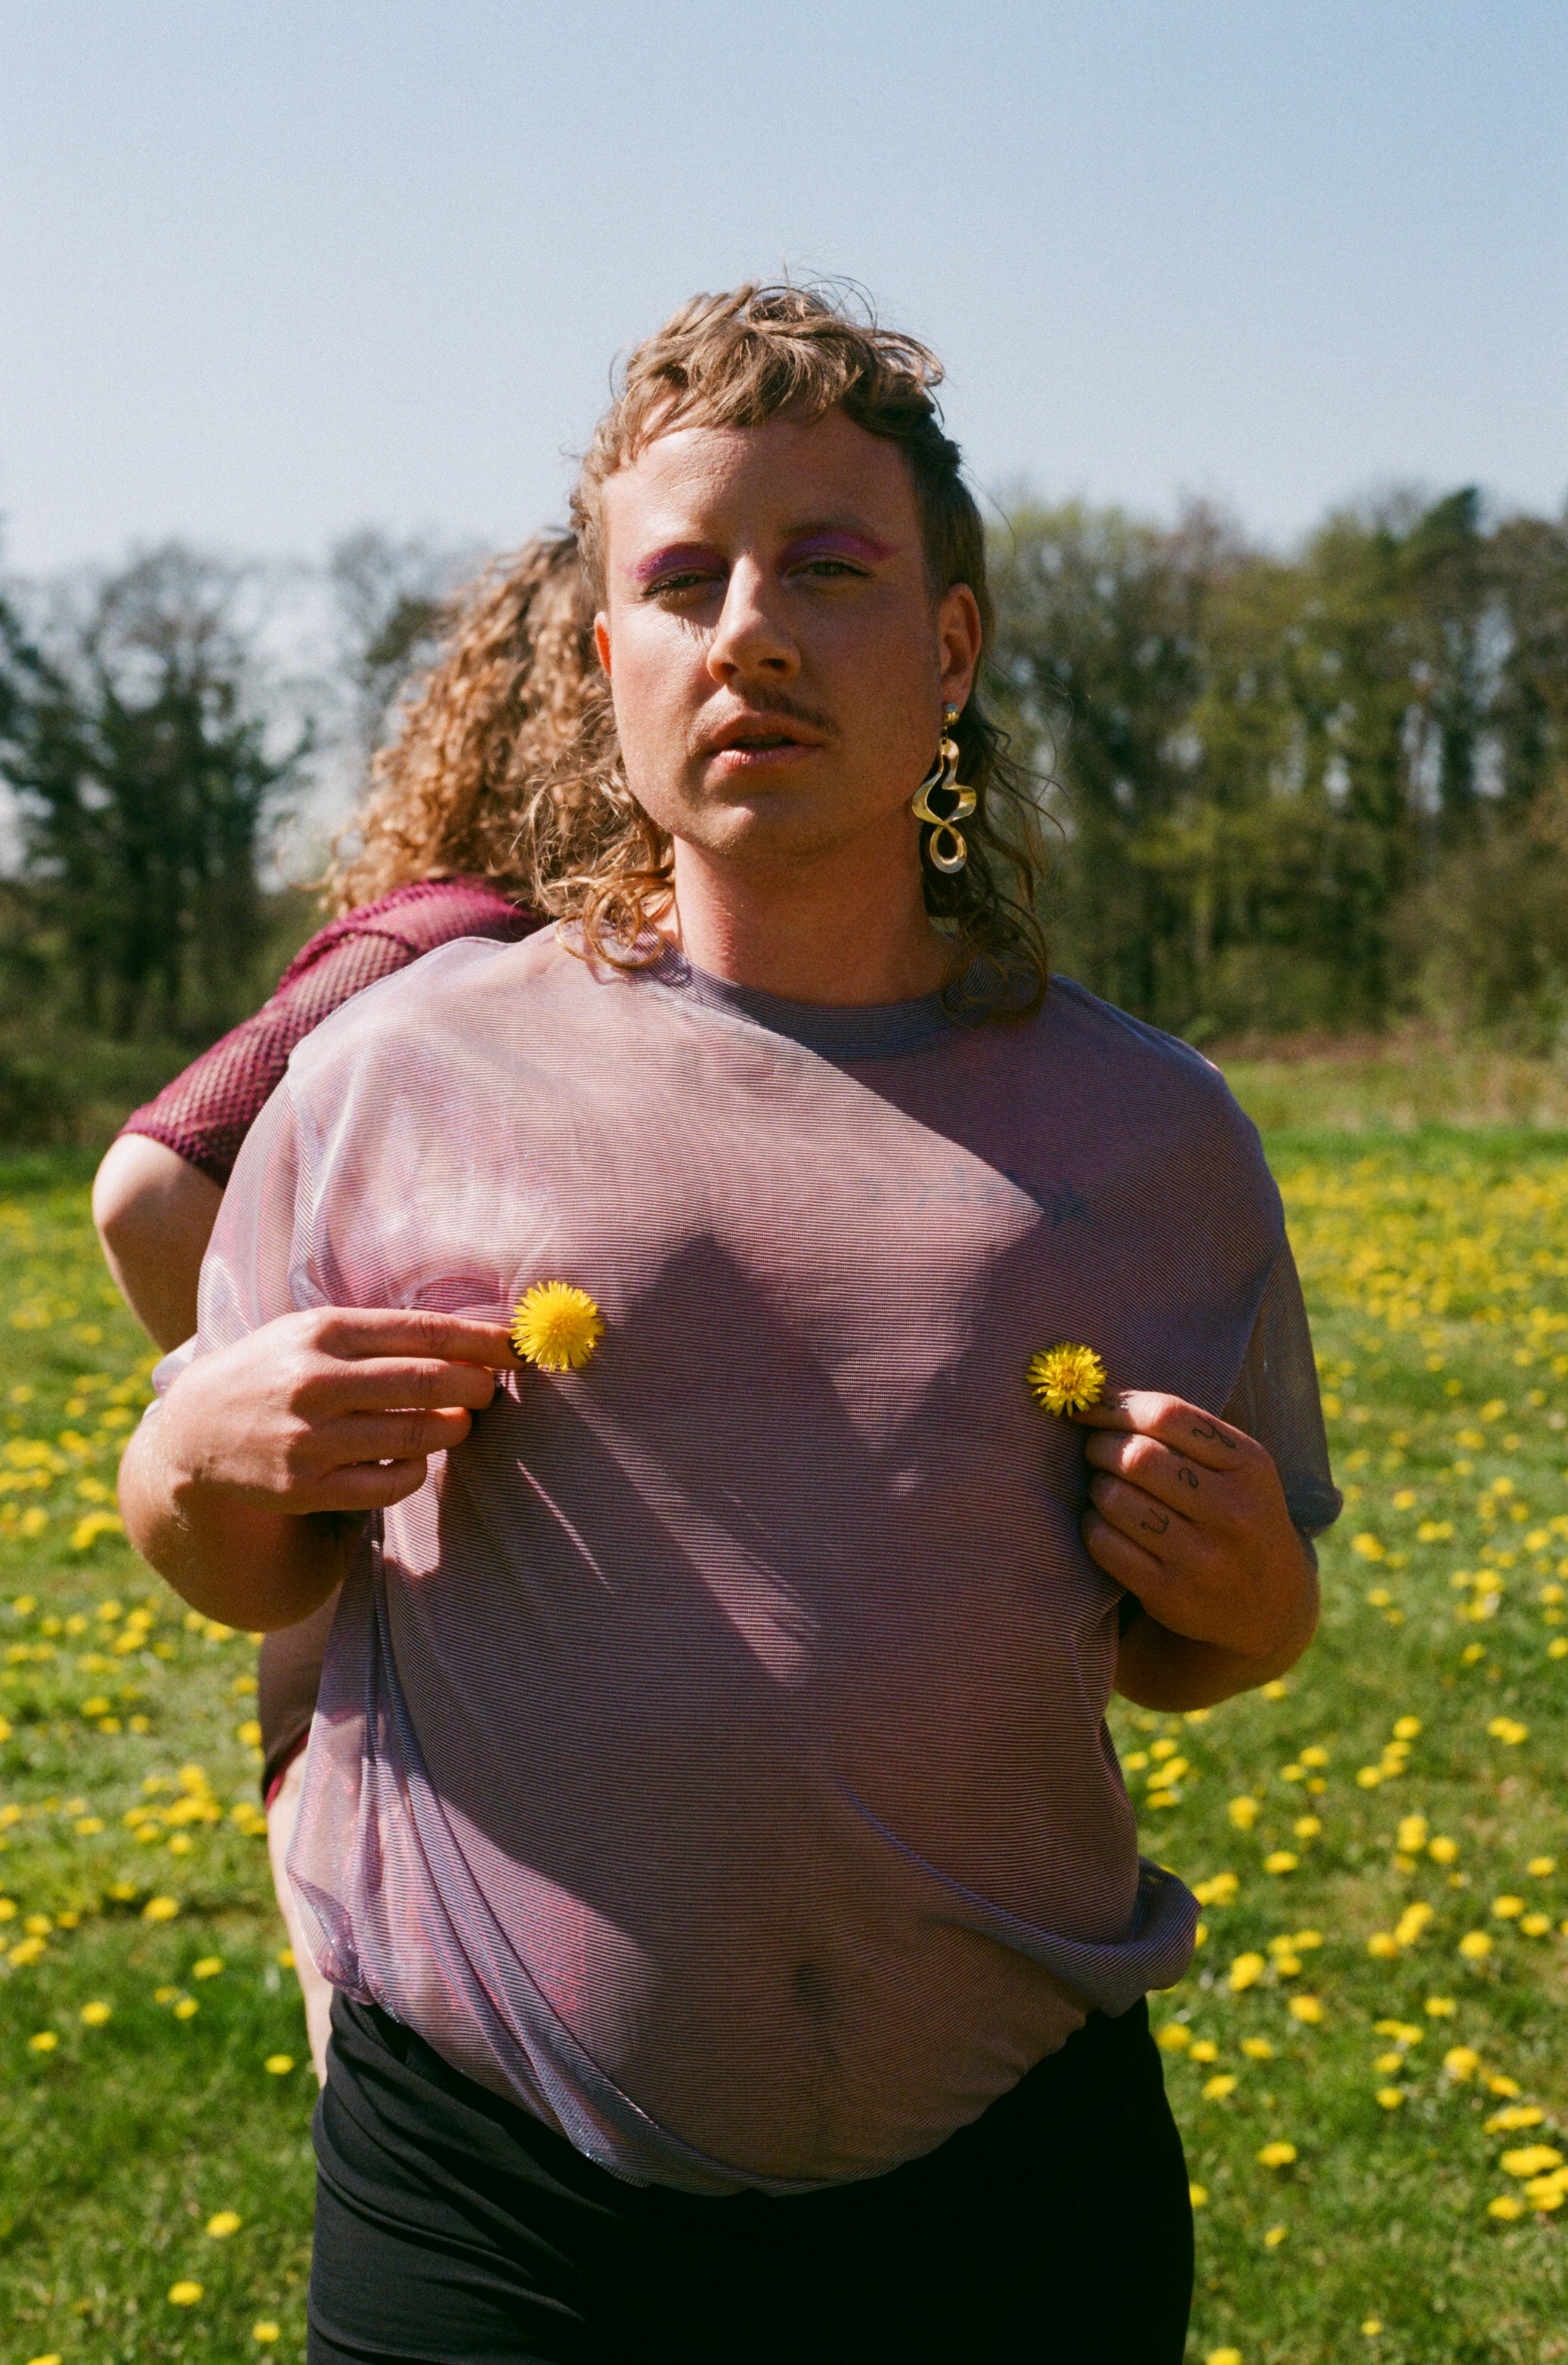 Our non-binary model Storm holds two yellow flowers and looks into the camera. You can faintly see his mastectomy scars